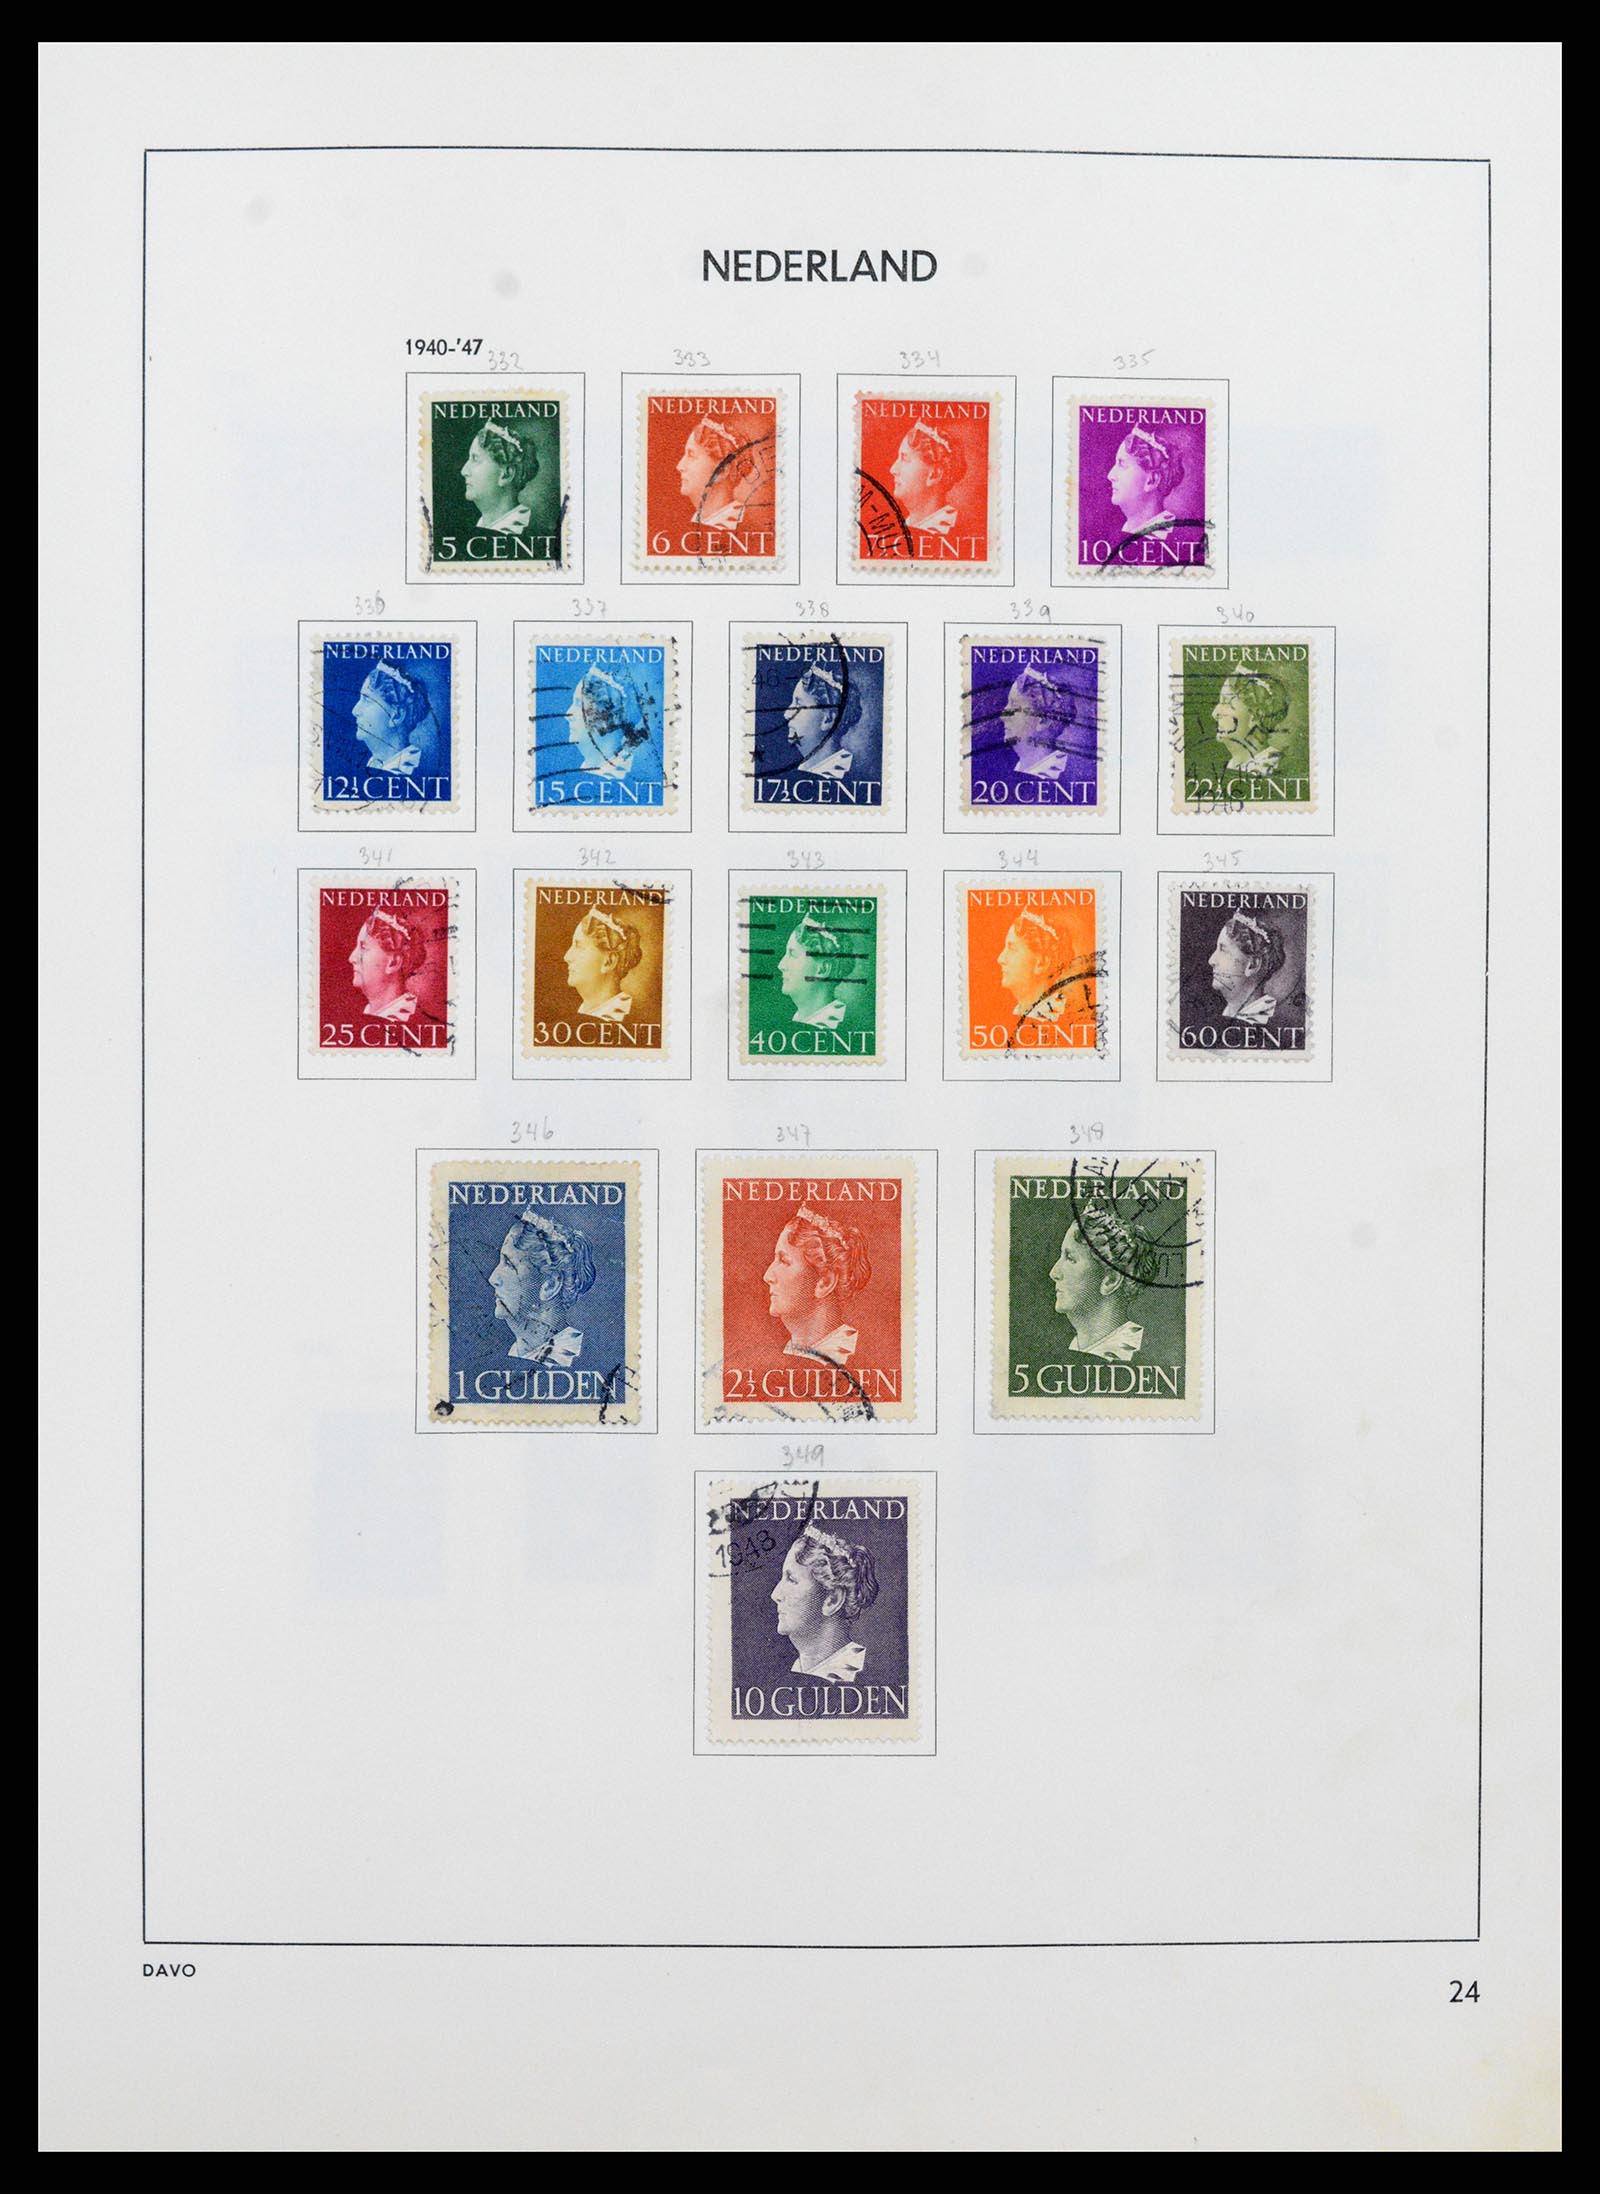 37346 024 - Stamp collection 37346 Netherlands 1852-1996.